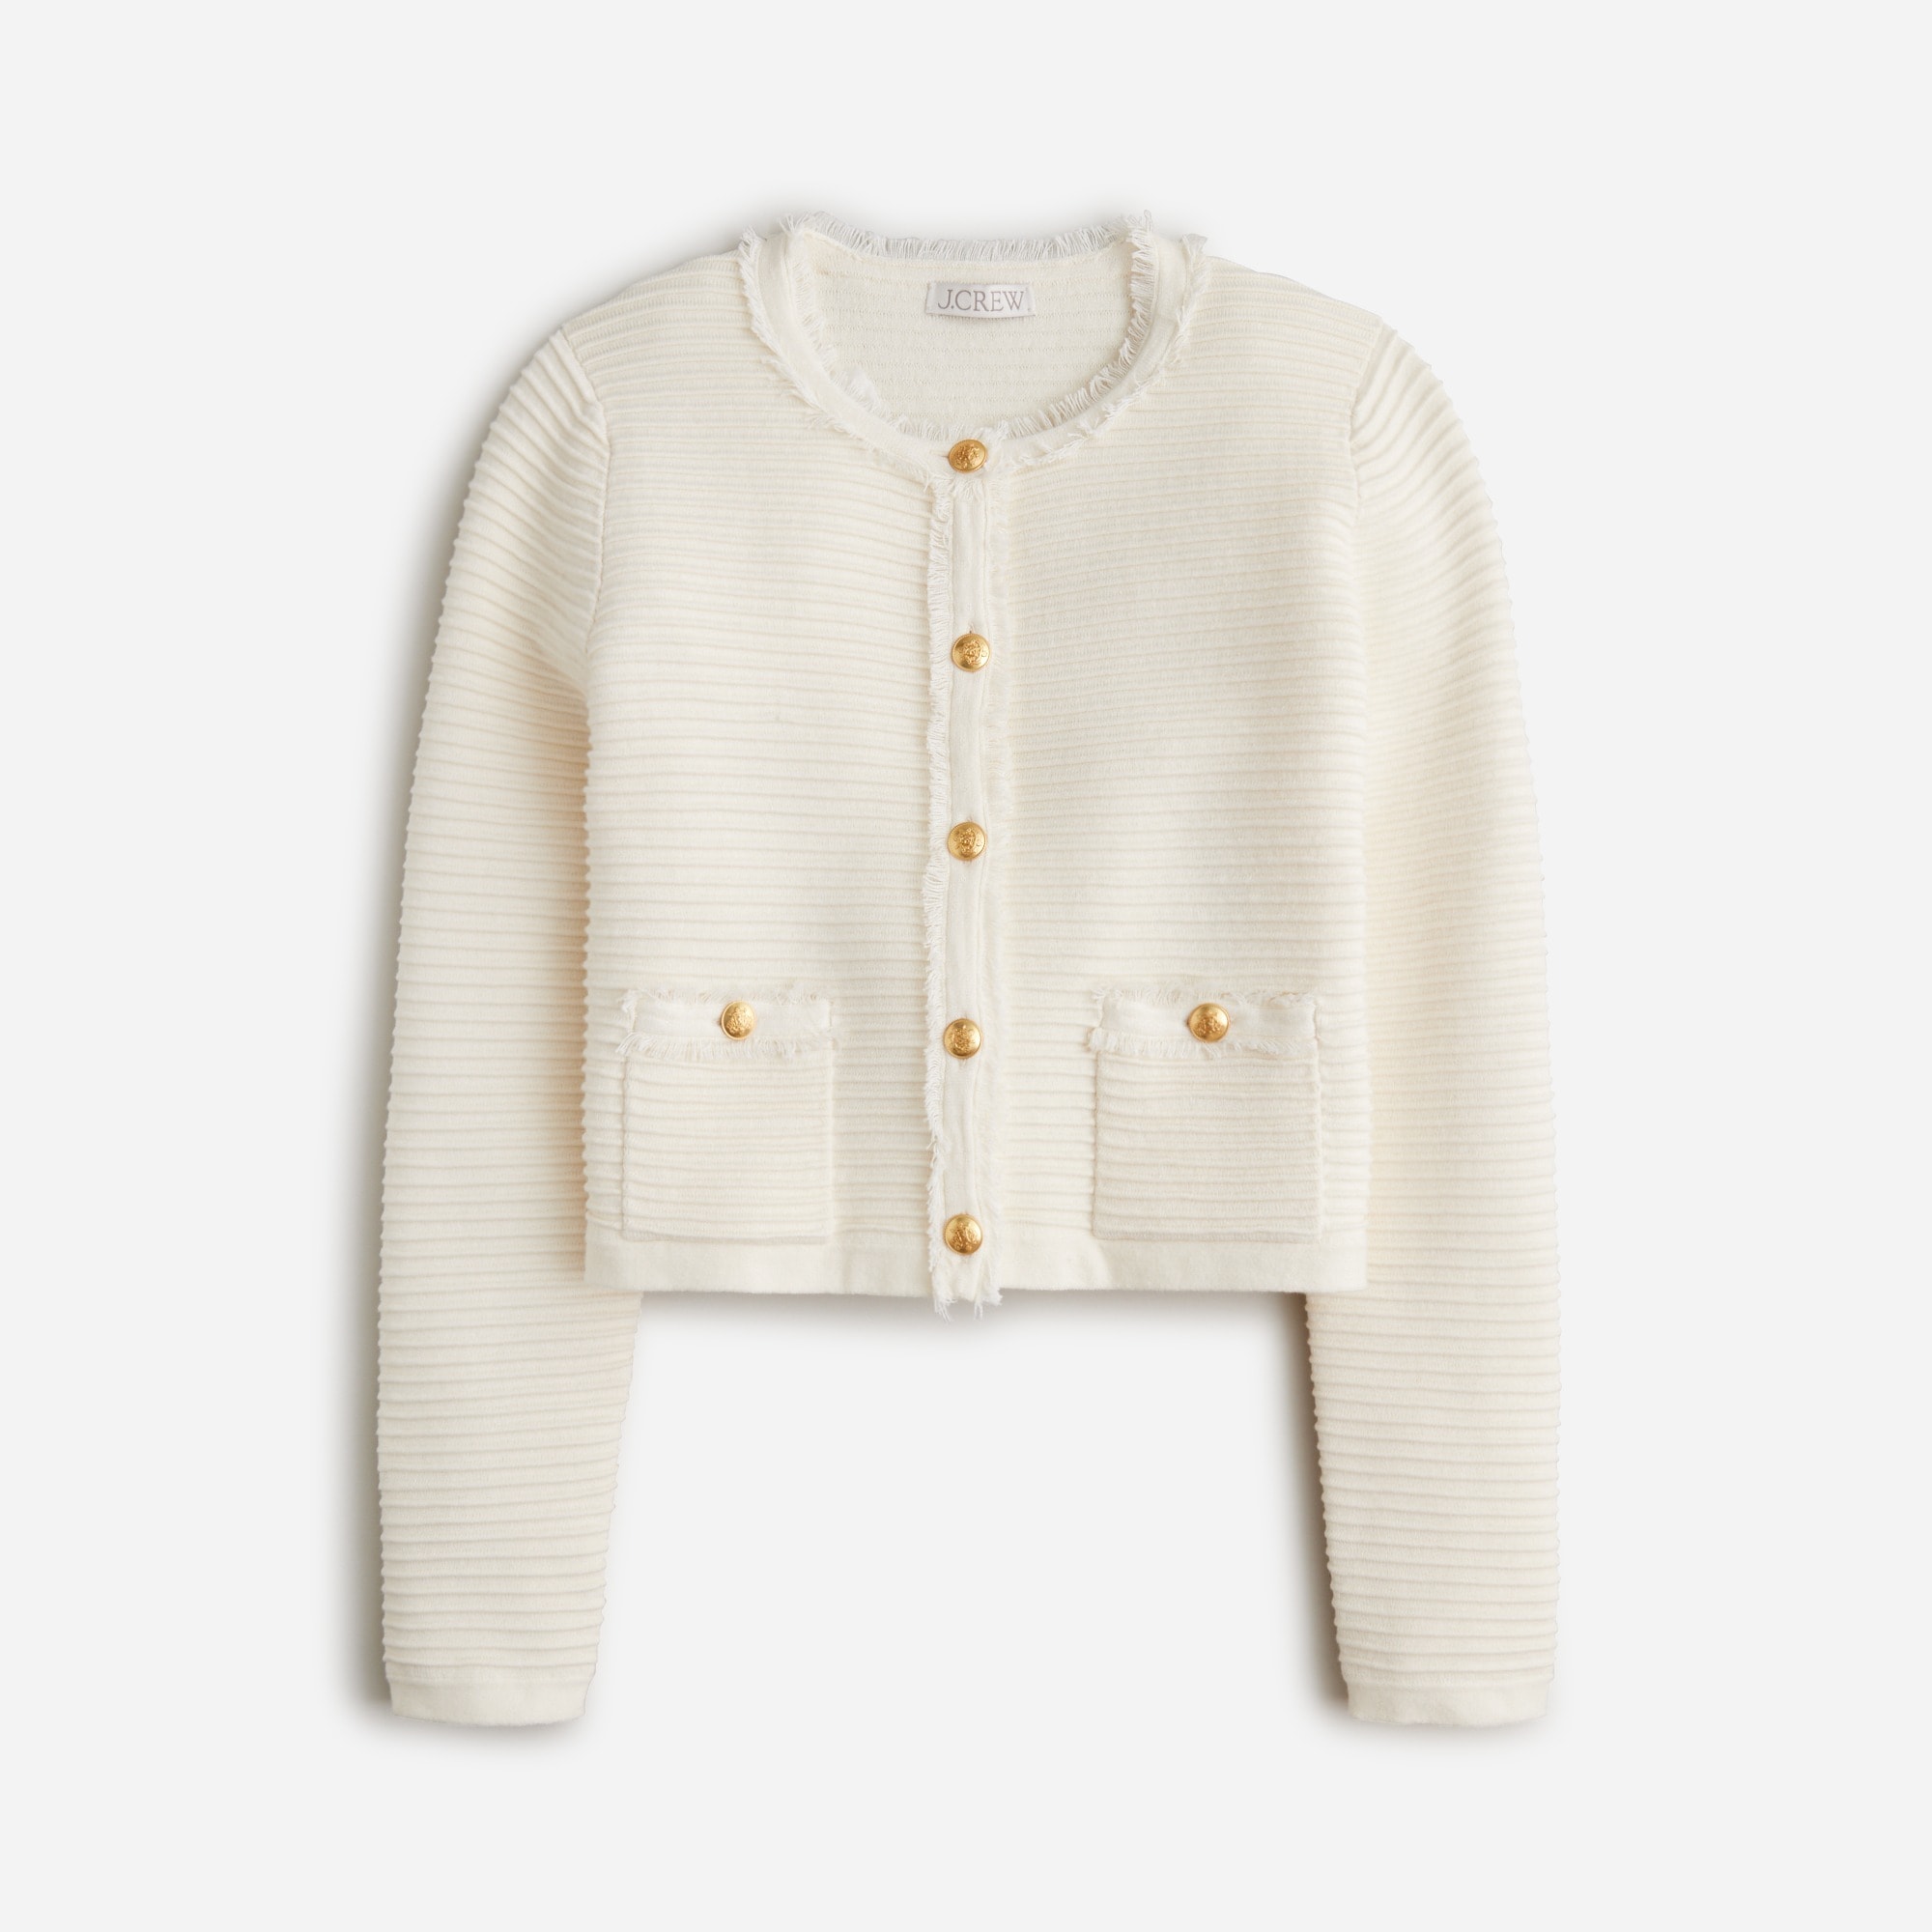  Emilie sweater lady jacket in textured cotton blend